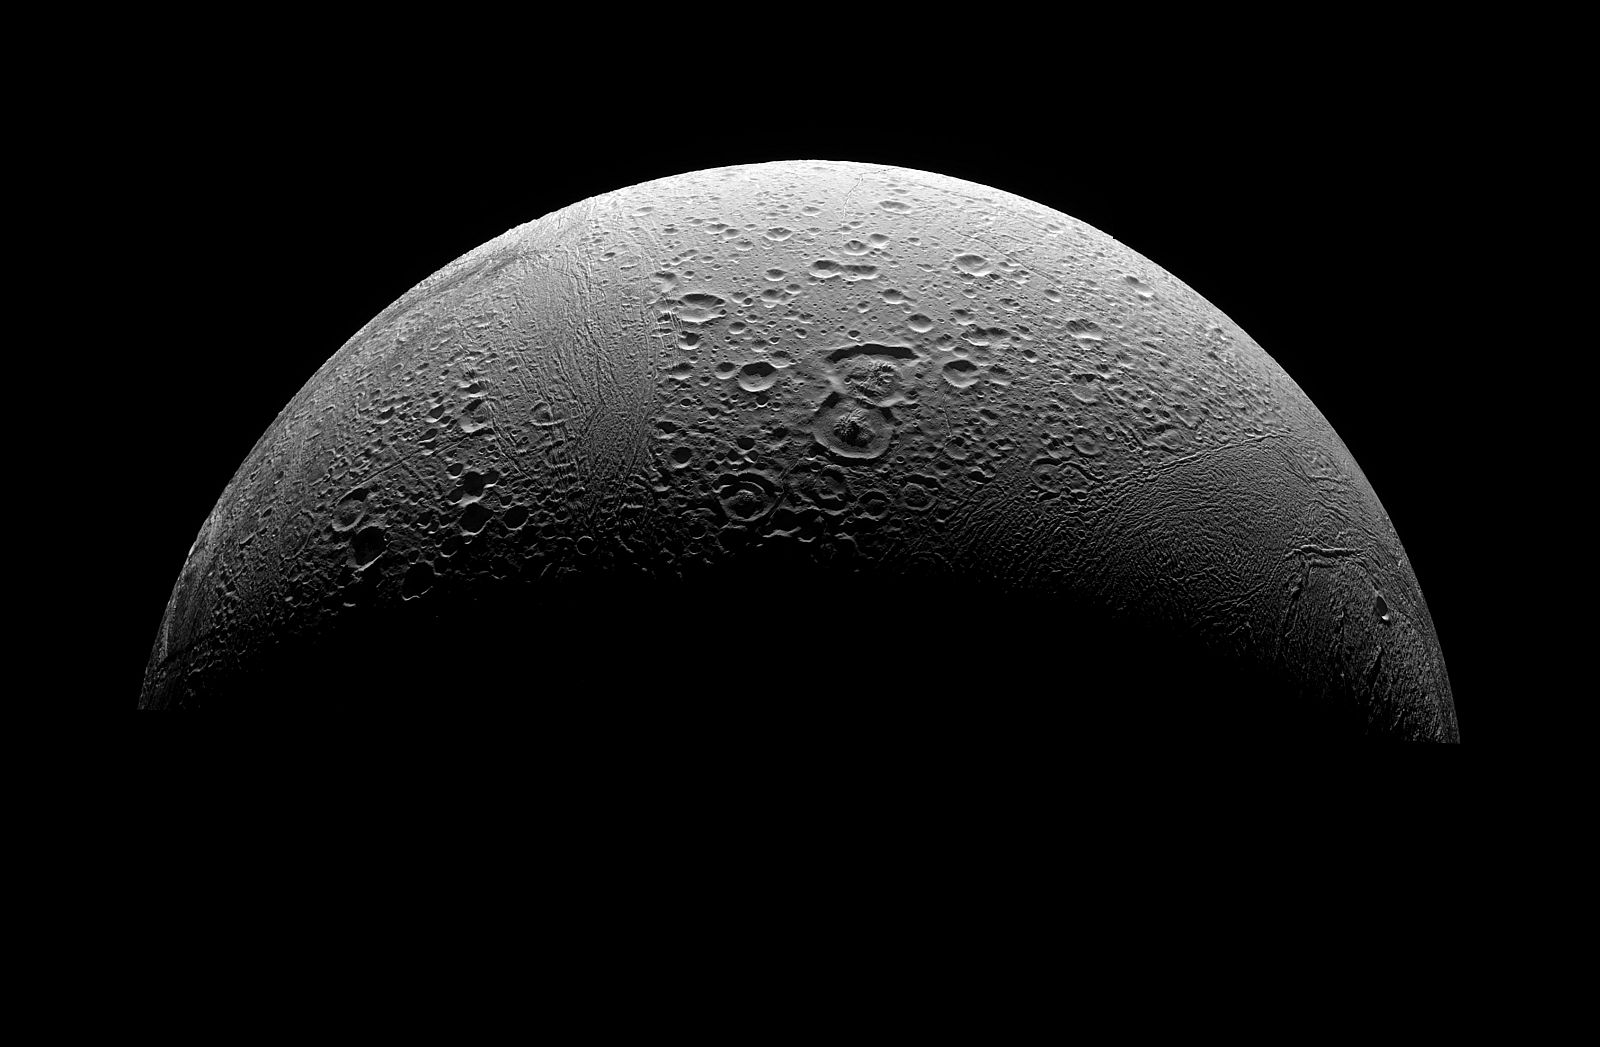 Handout photo of the highest resolution view ever obtained of the north polar region of Saturn's moon Enceladus